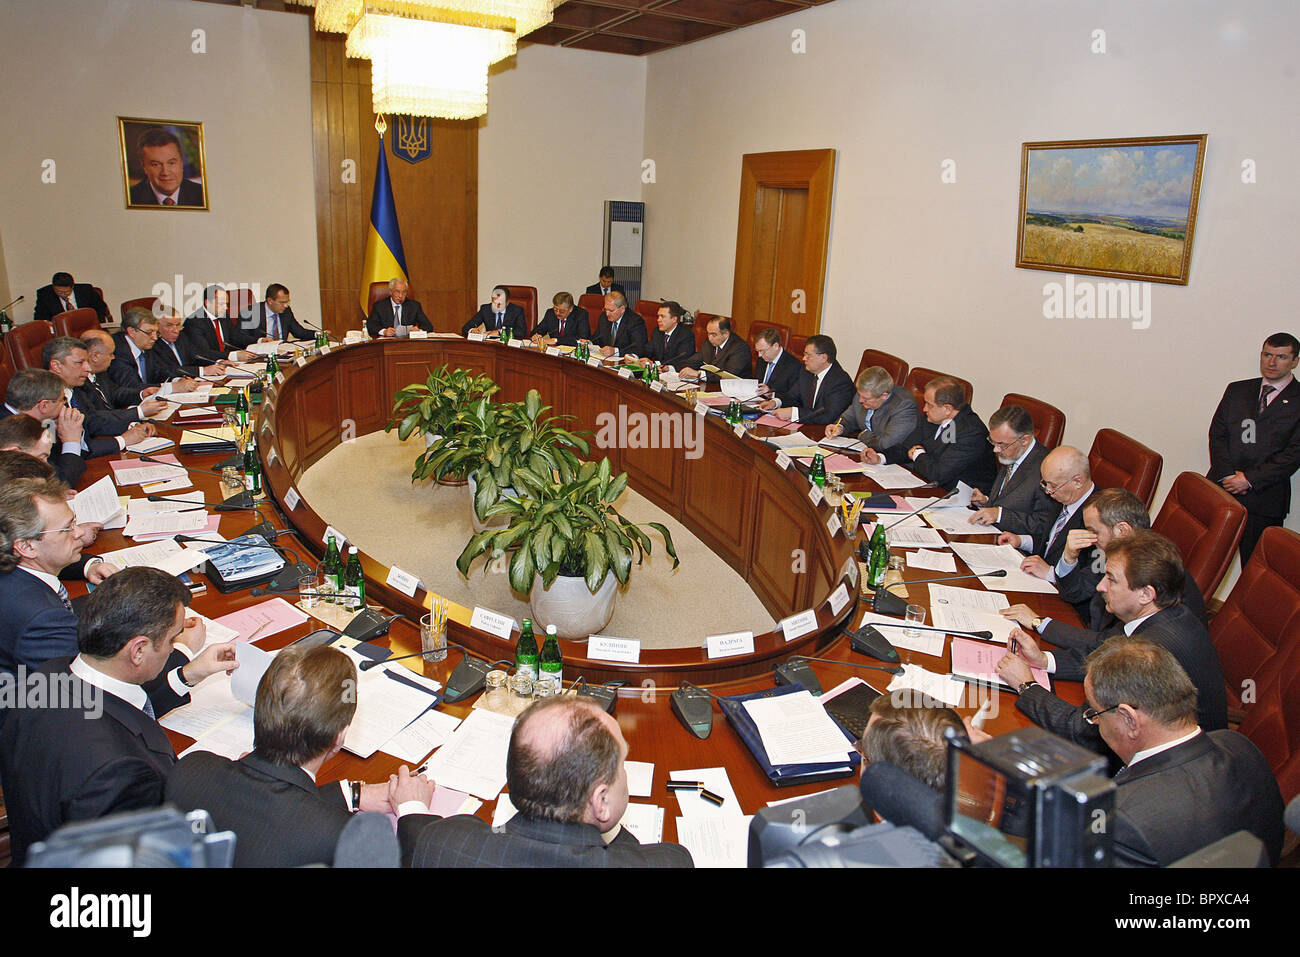 New Cabinet Ministers Of Ukraine In Session Stock Photo 31313244